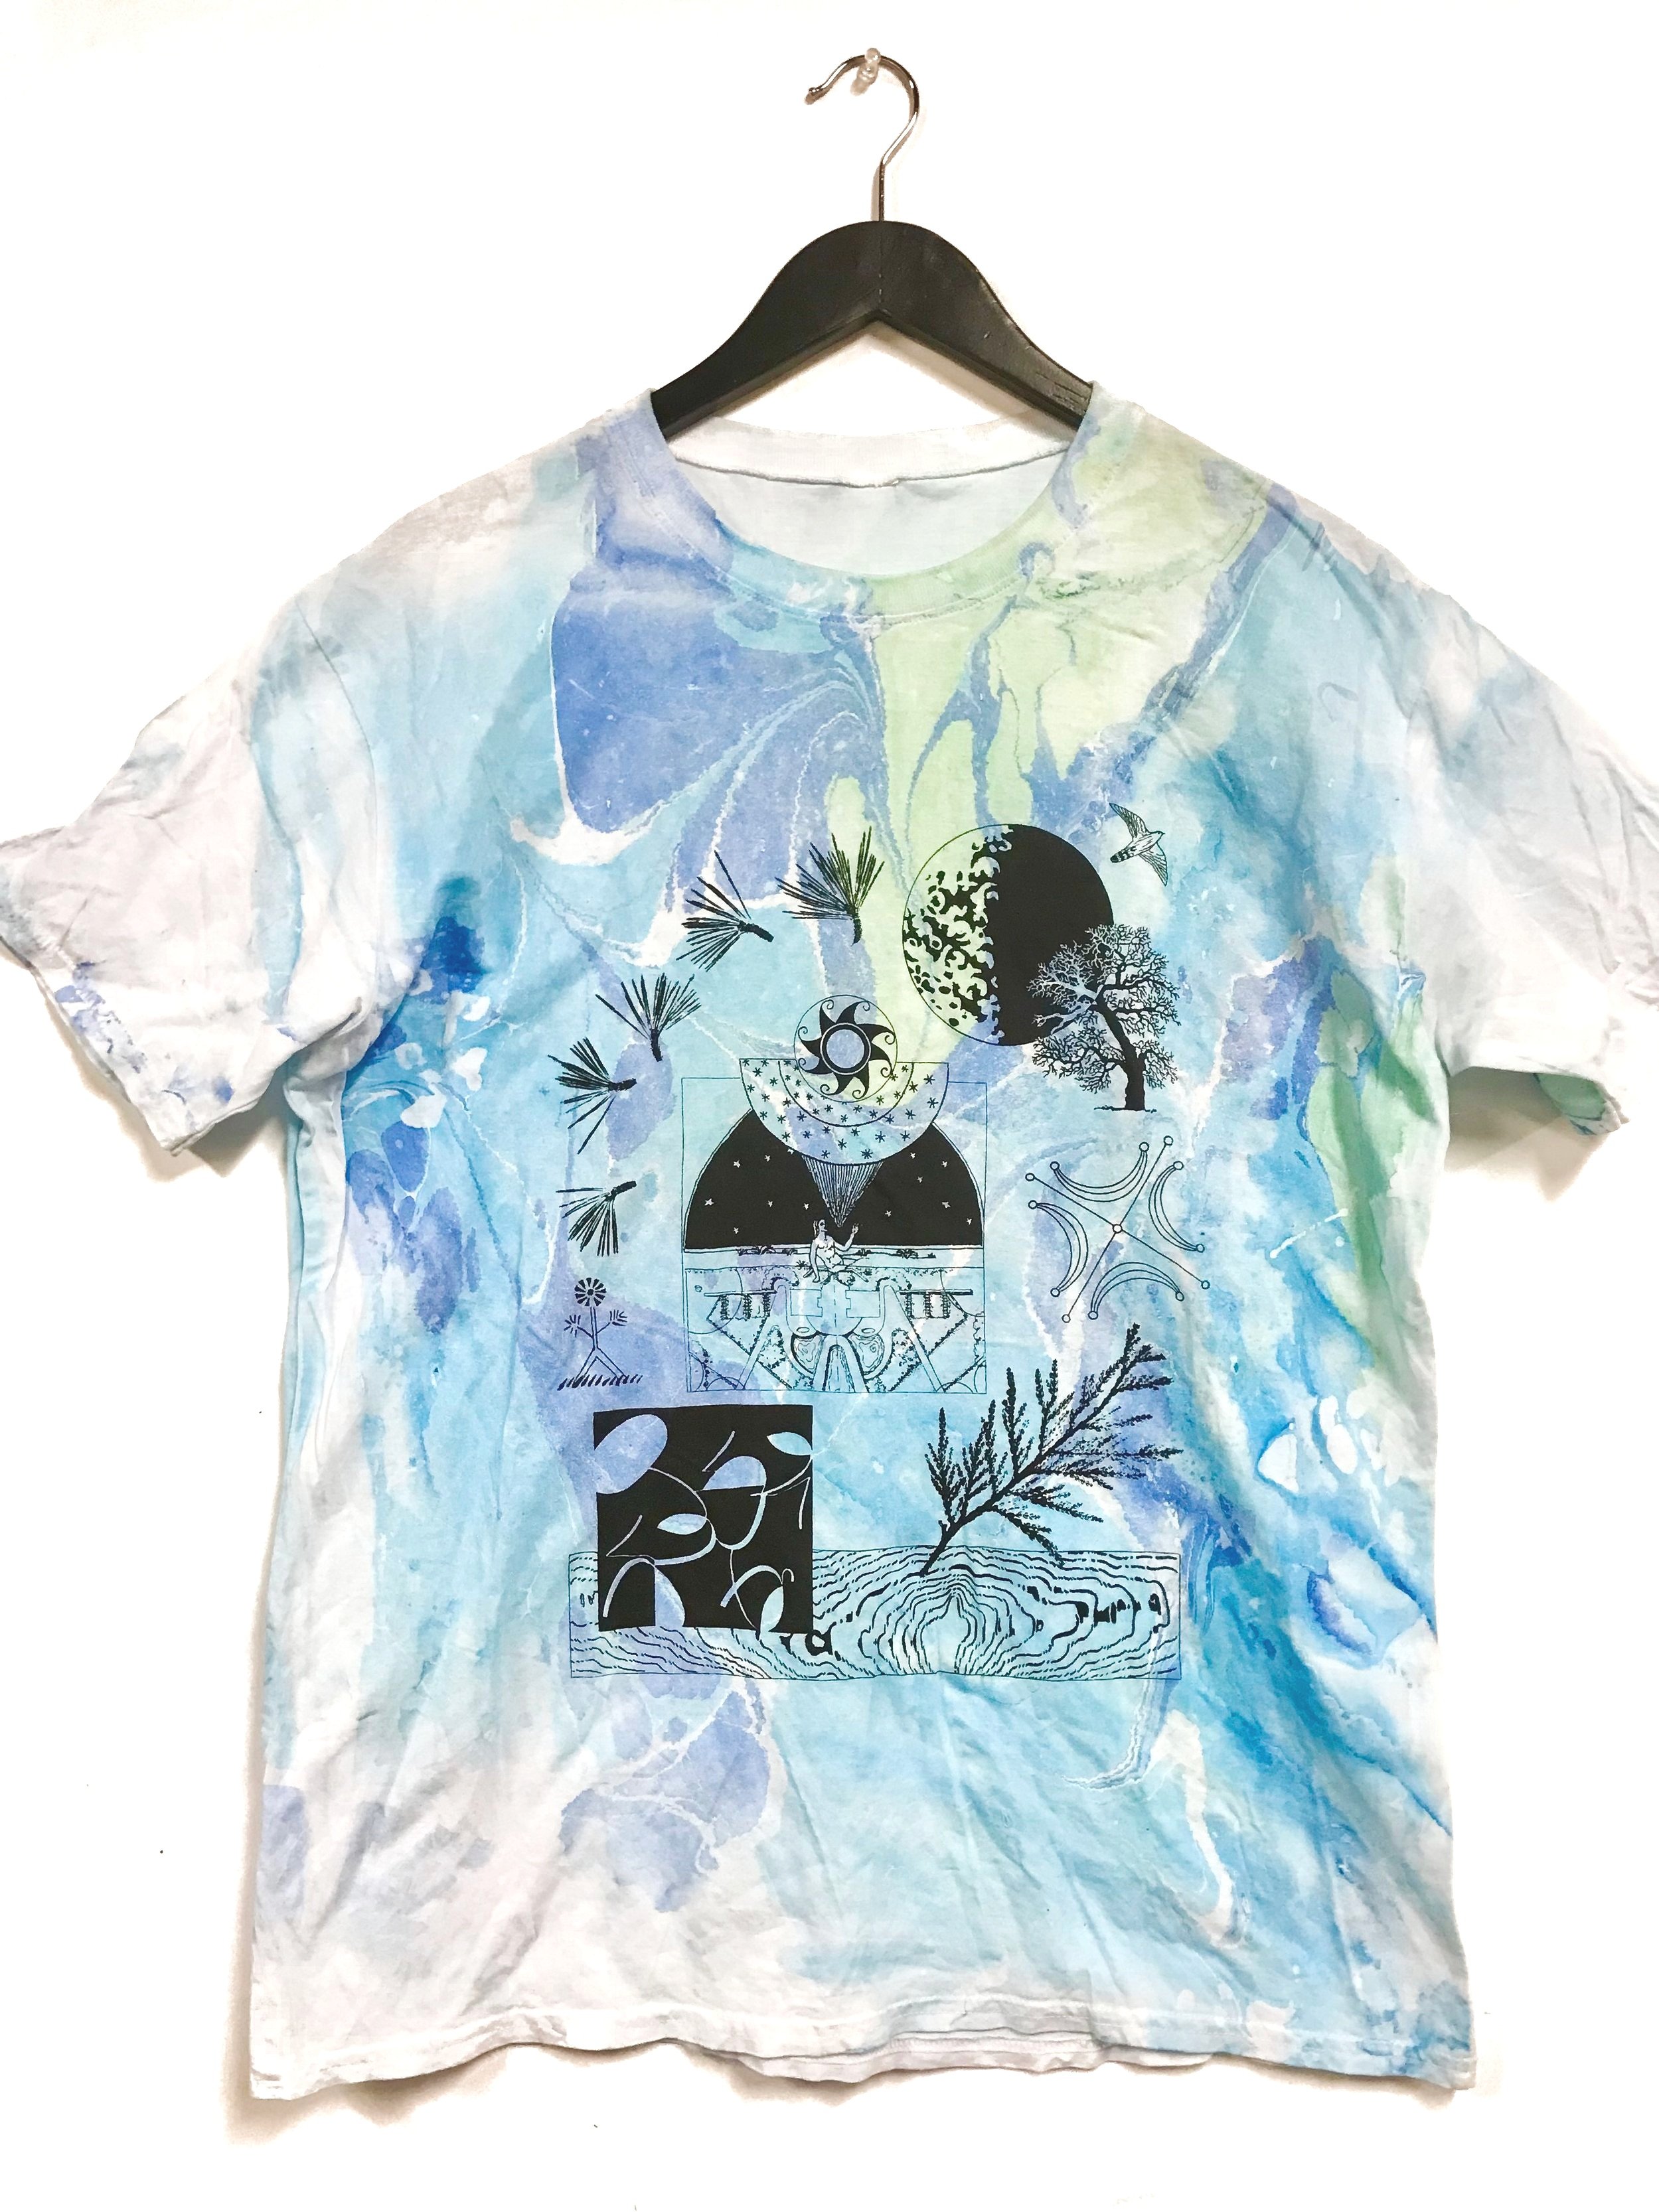  One of a kind hand marbled and printed Solstice shirt  2021 